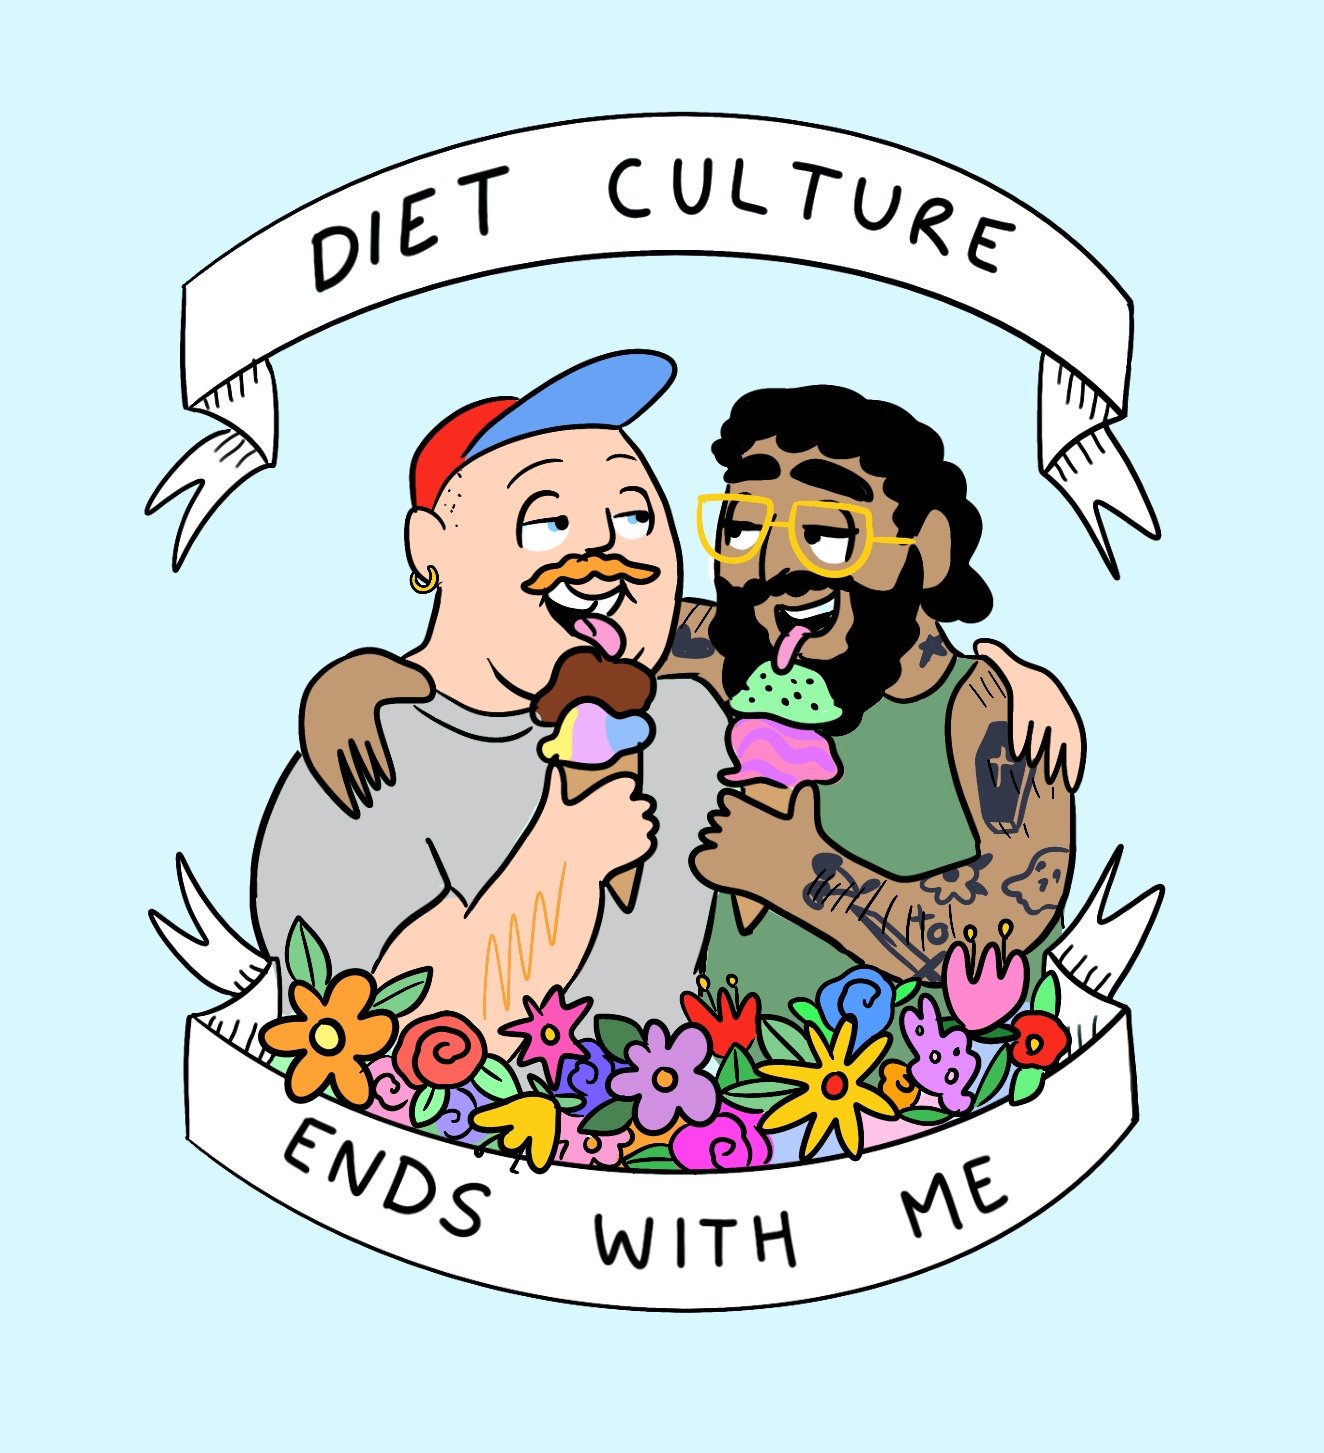 Image of Diet Culture Ends With Me - blue